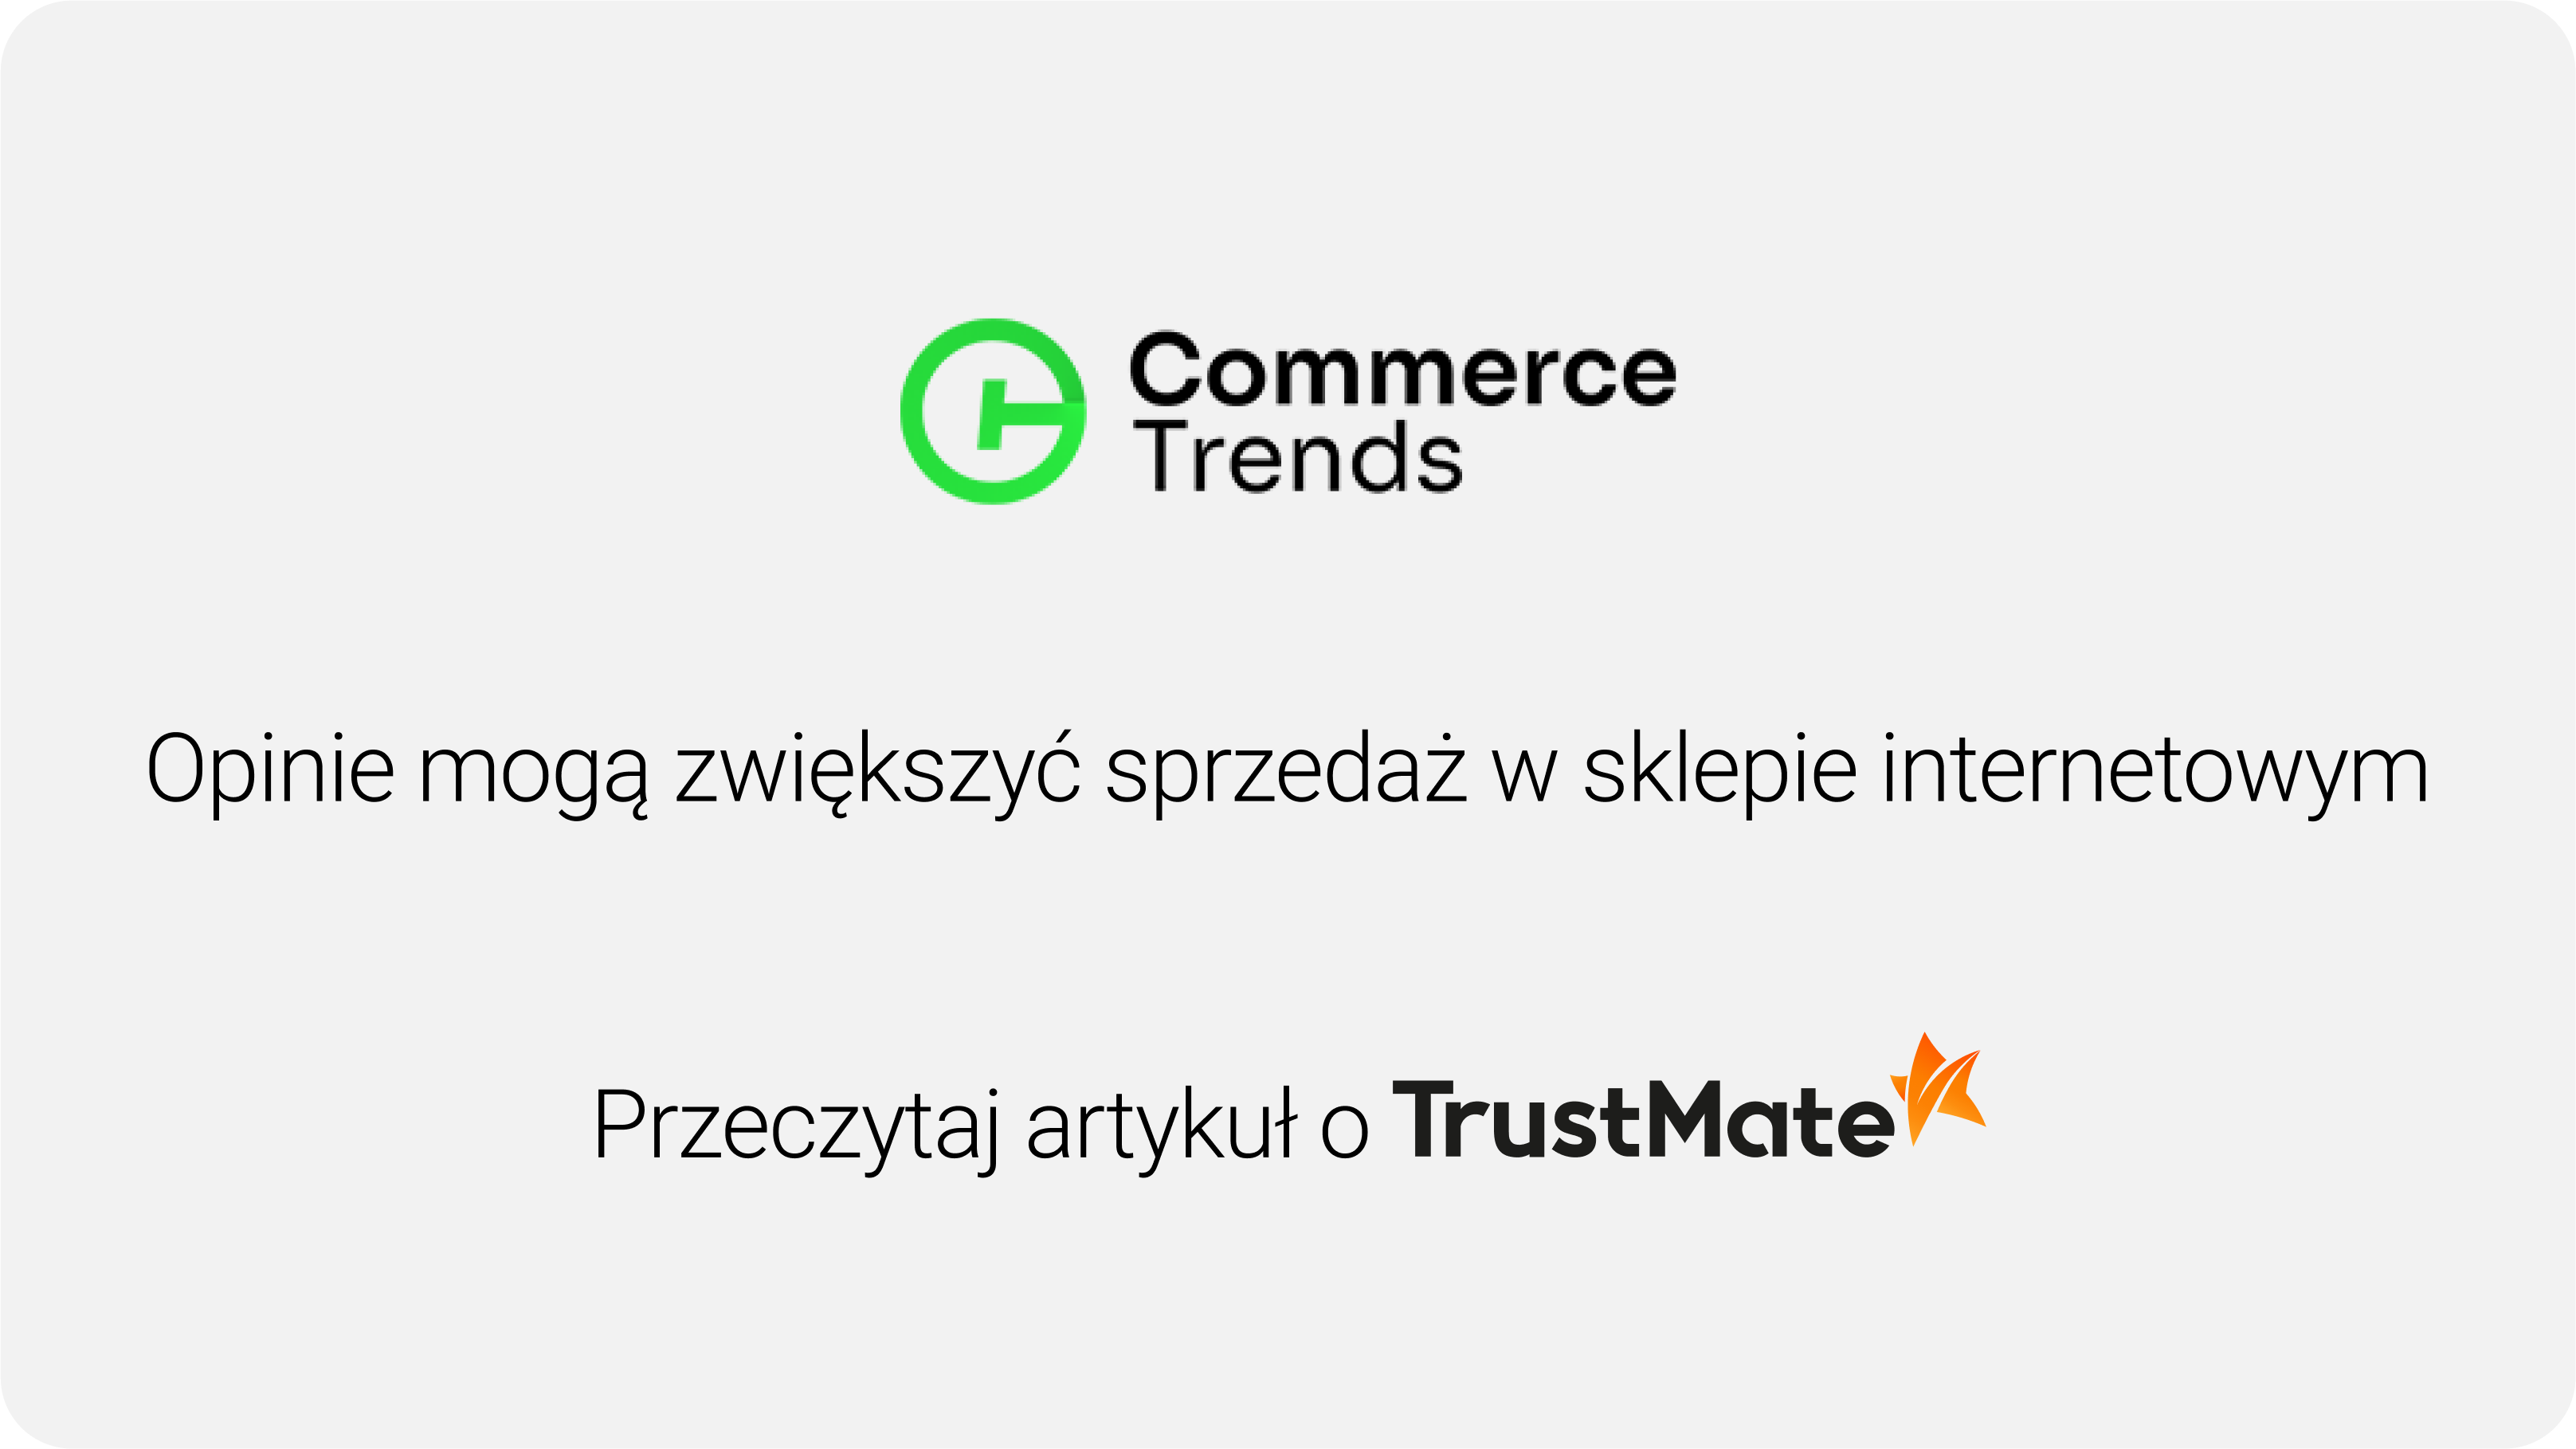 commercetrends o trustmate